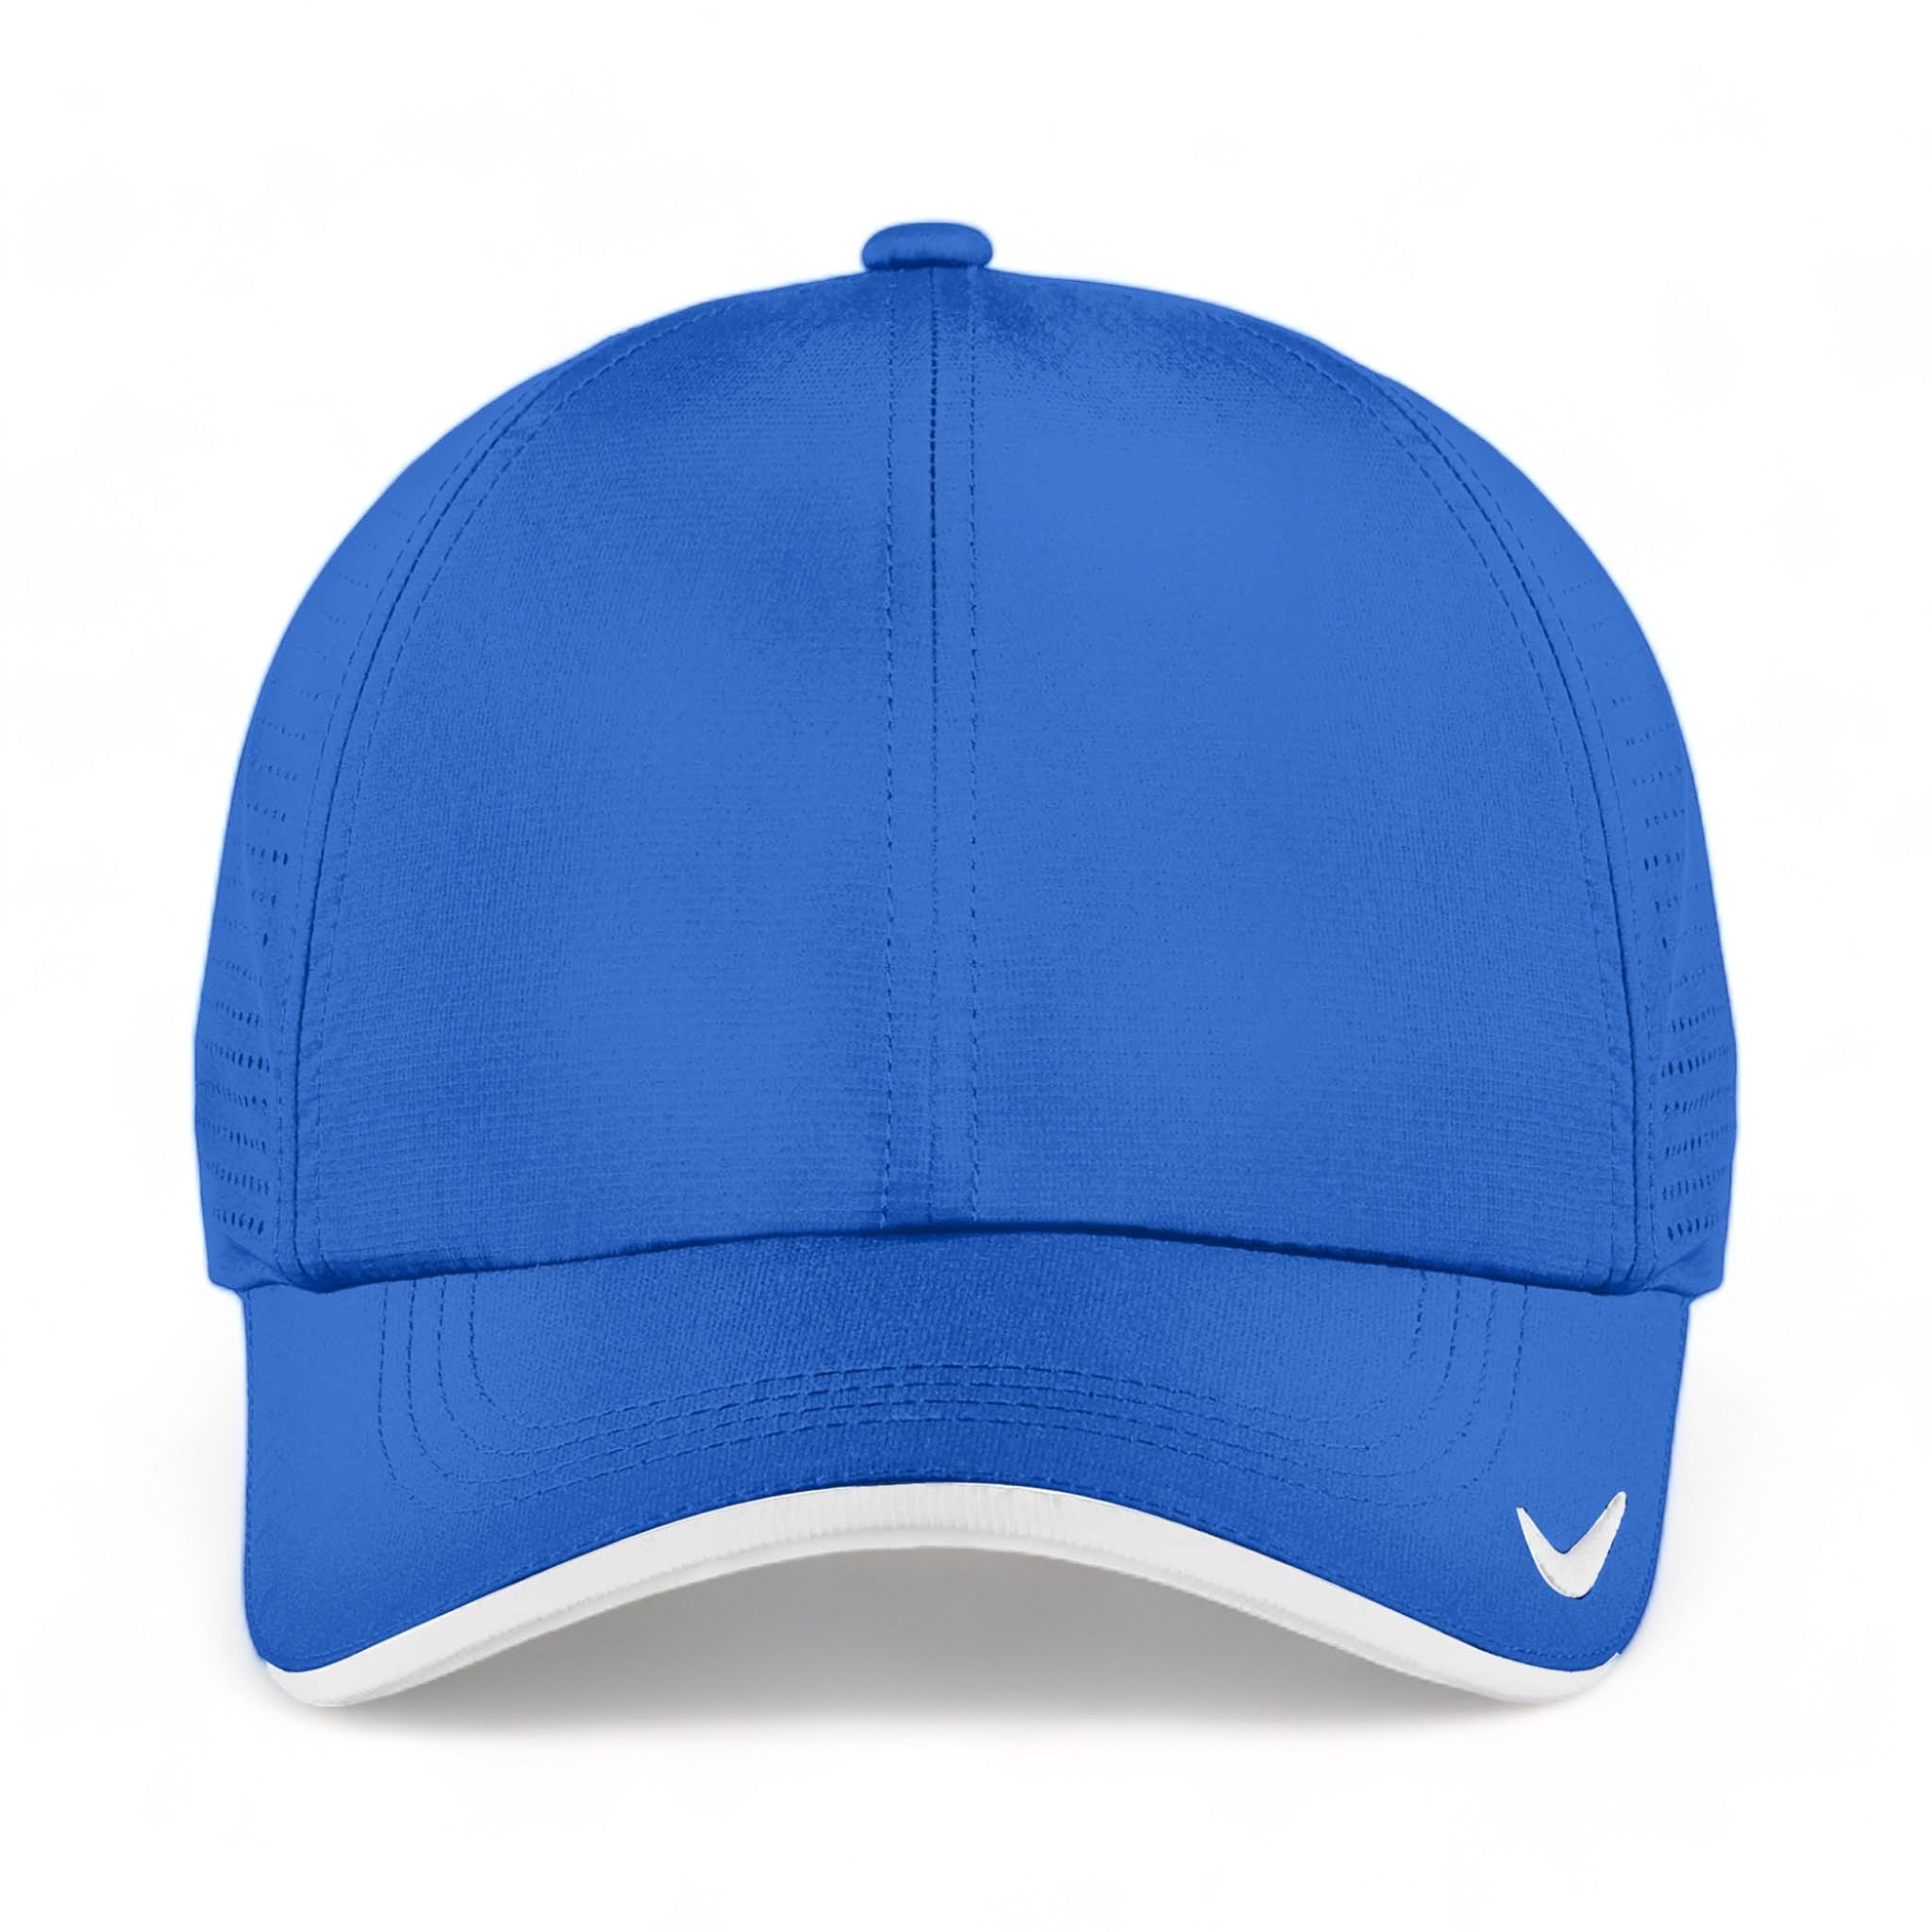 Front view of Nike NKFB6445 custom hat in game royal and white